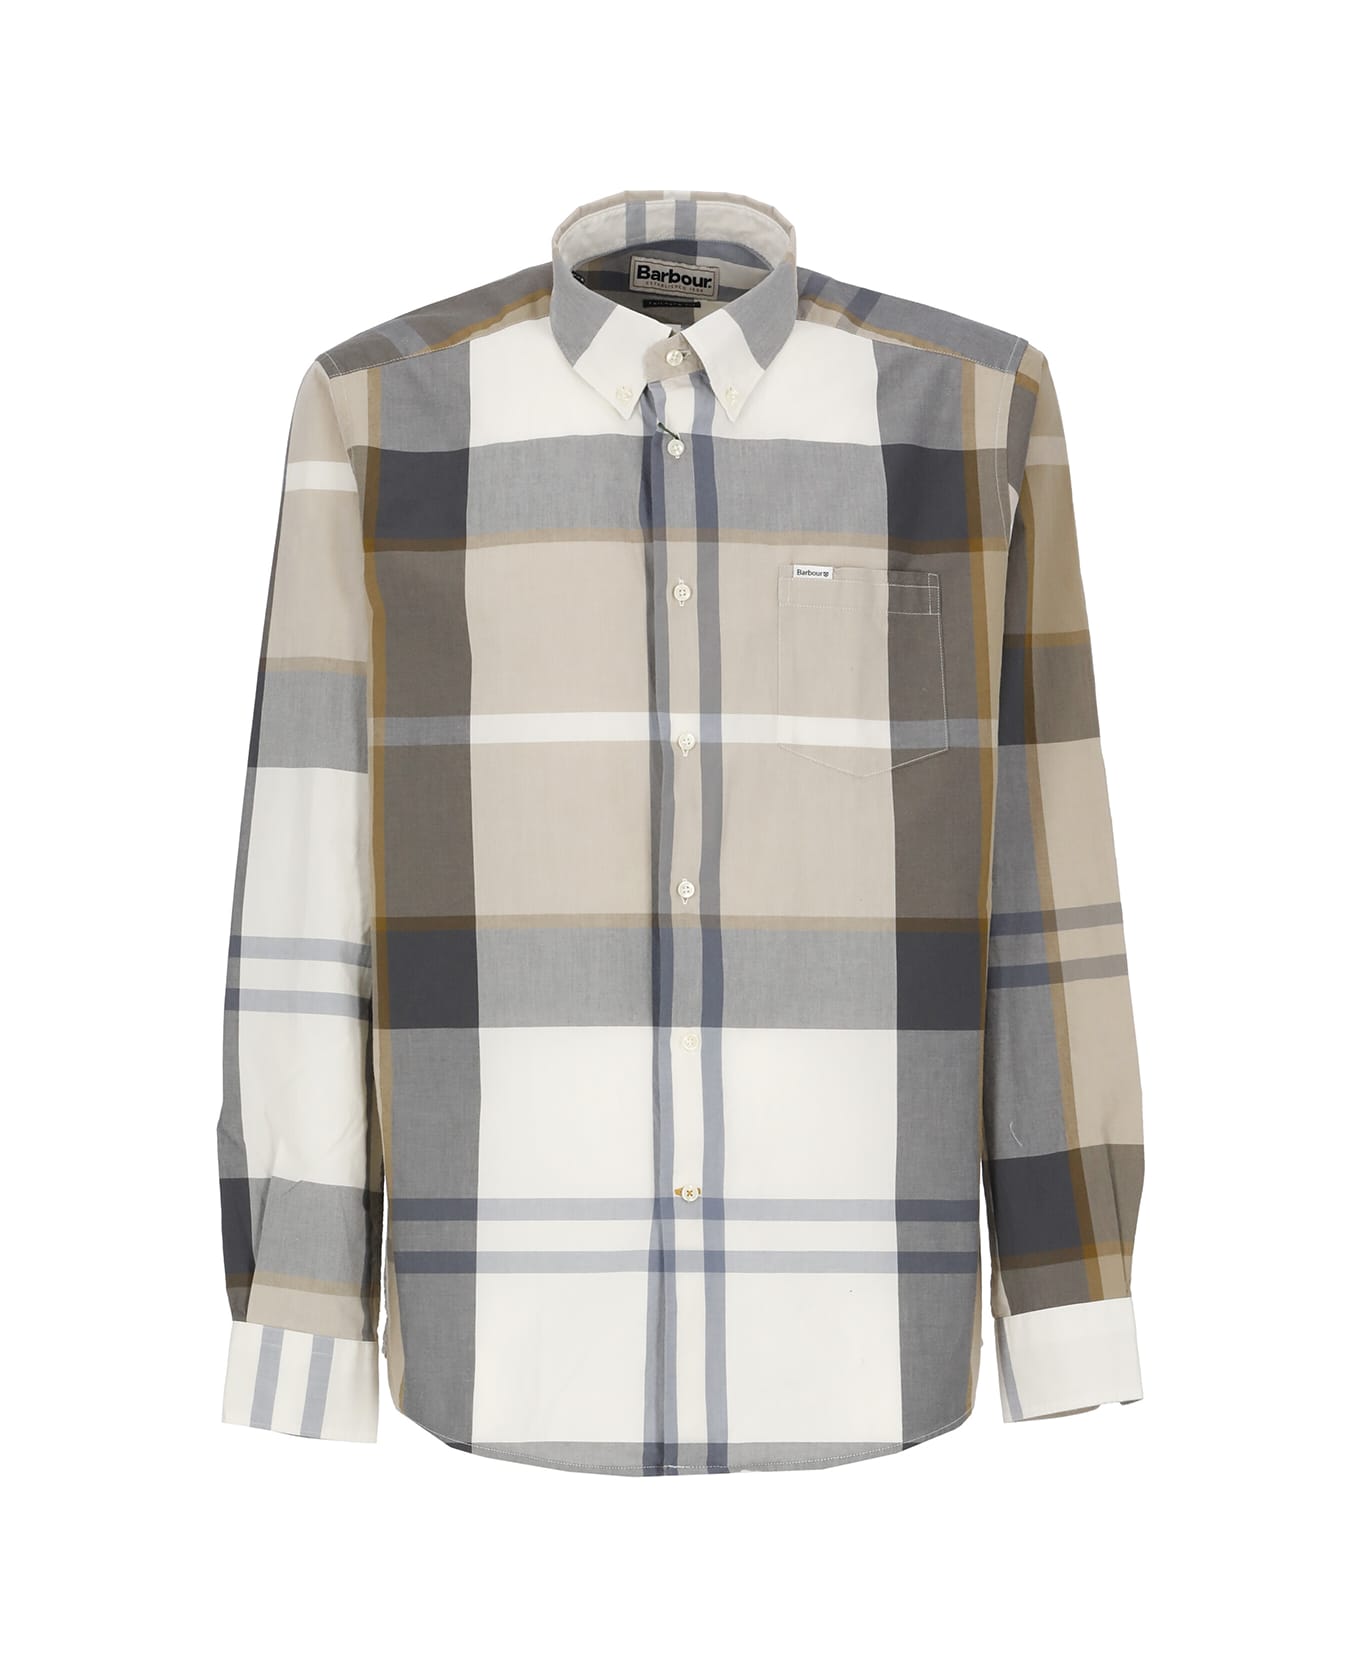 Barbour Shirt With Tartan Pattern - MULTICOLOR シャツ